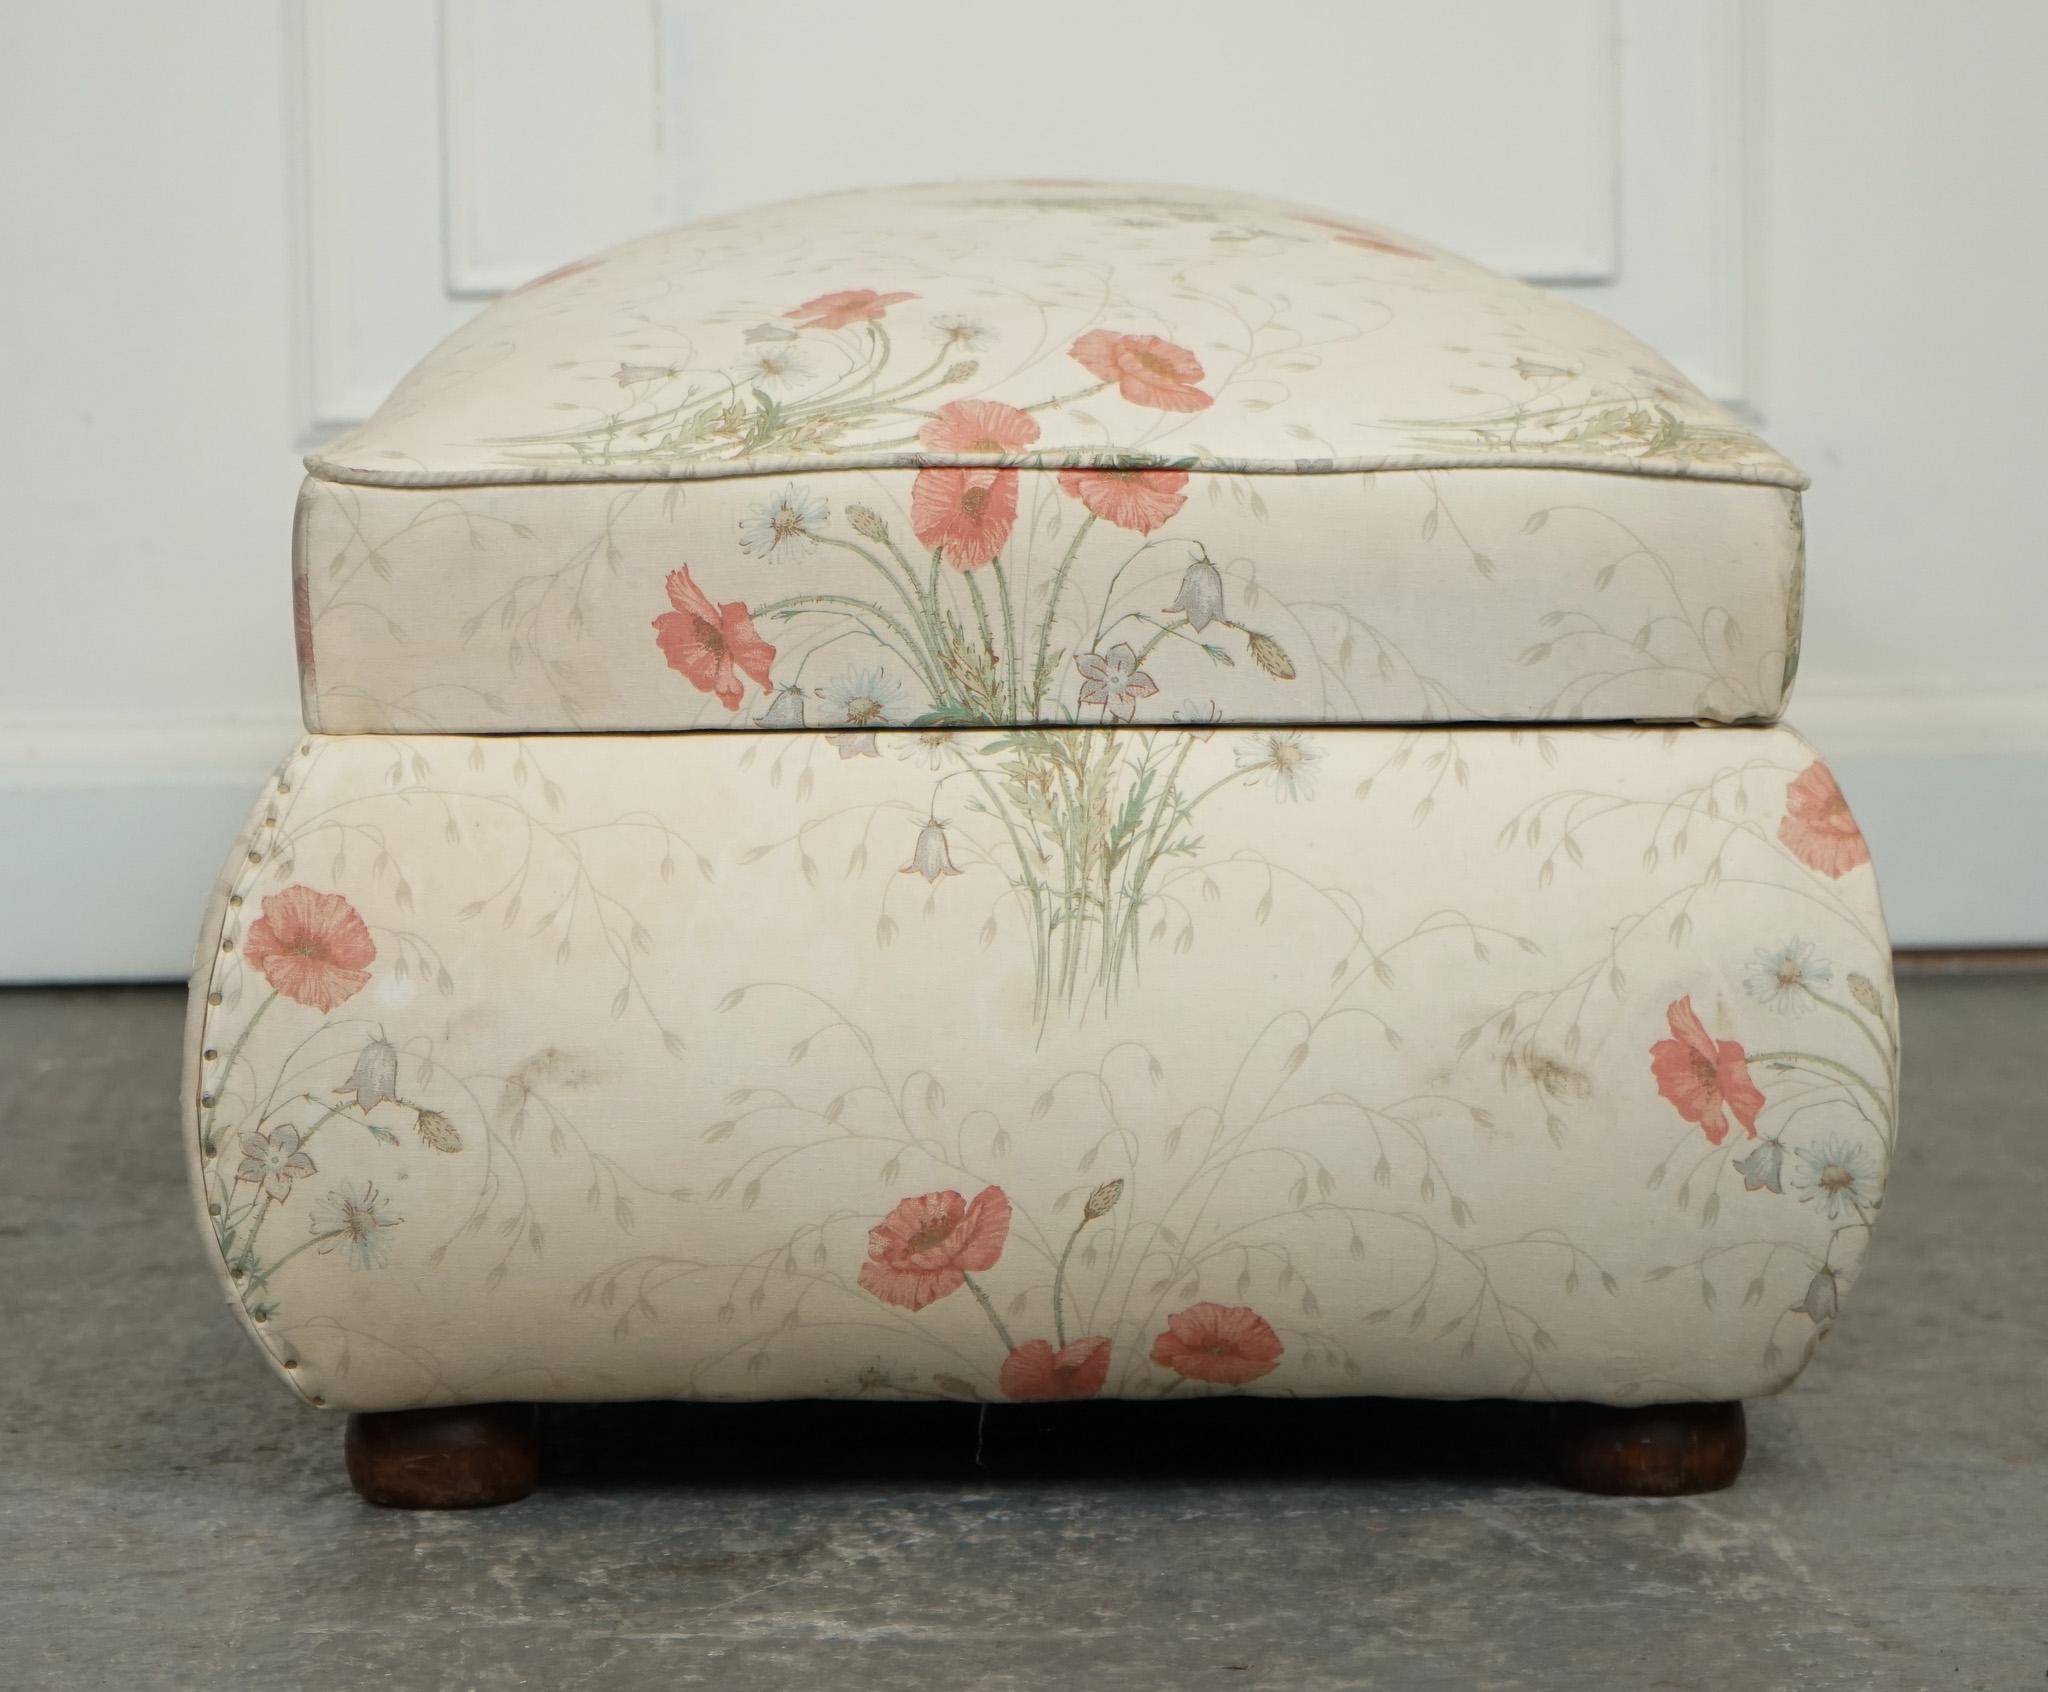 LARGE ANTIQUE VICTORIAN POPPY FLOWER PATTERN FABRiC OTTOMAN CHEST TRUNK  J1 For Sale 7